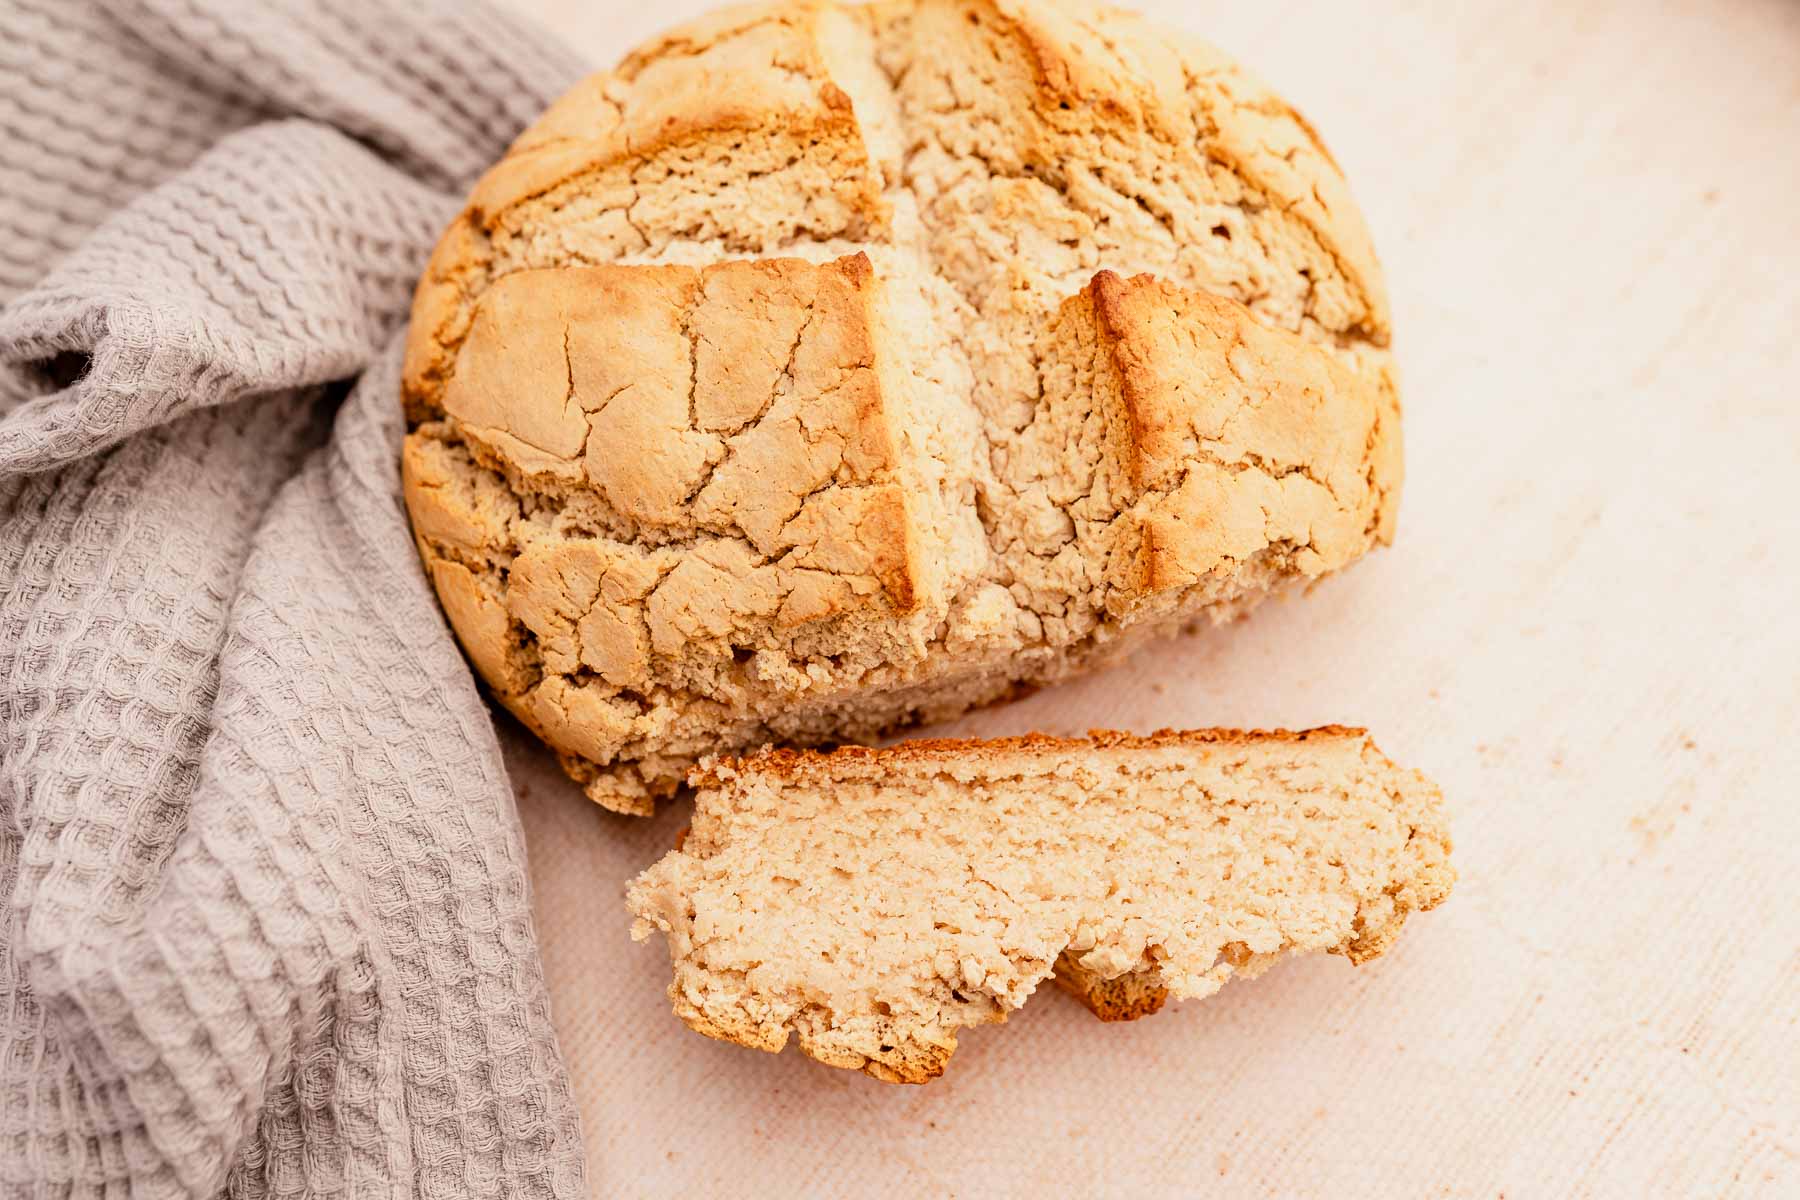 A gluten-free loaf of Irish soda bread with a piece missing.